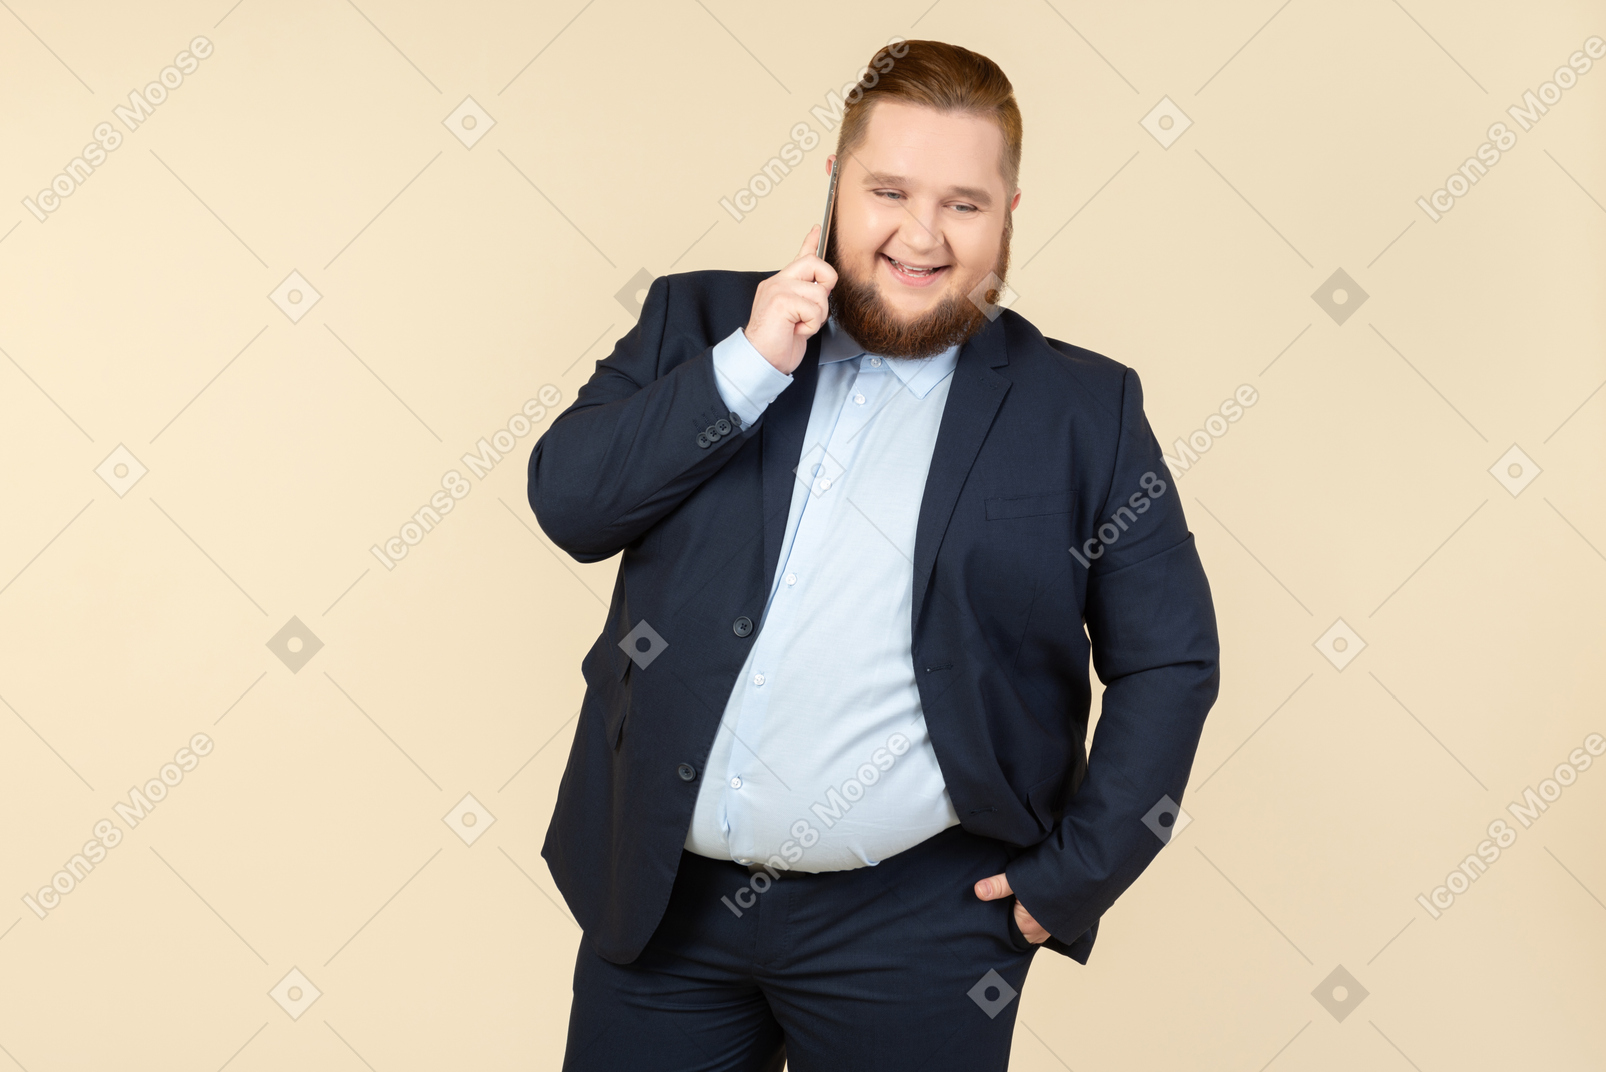 Laughing young overweight office worker talking on the phone